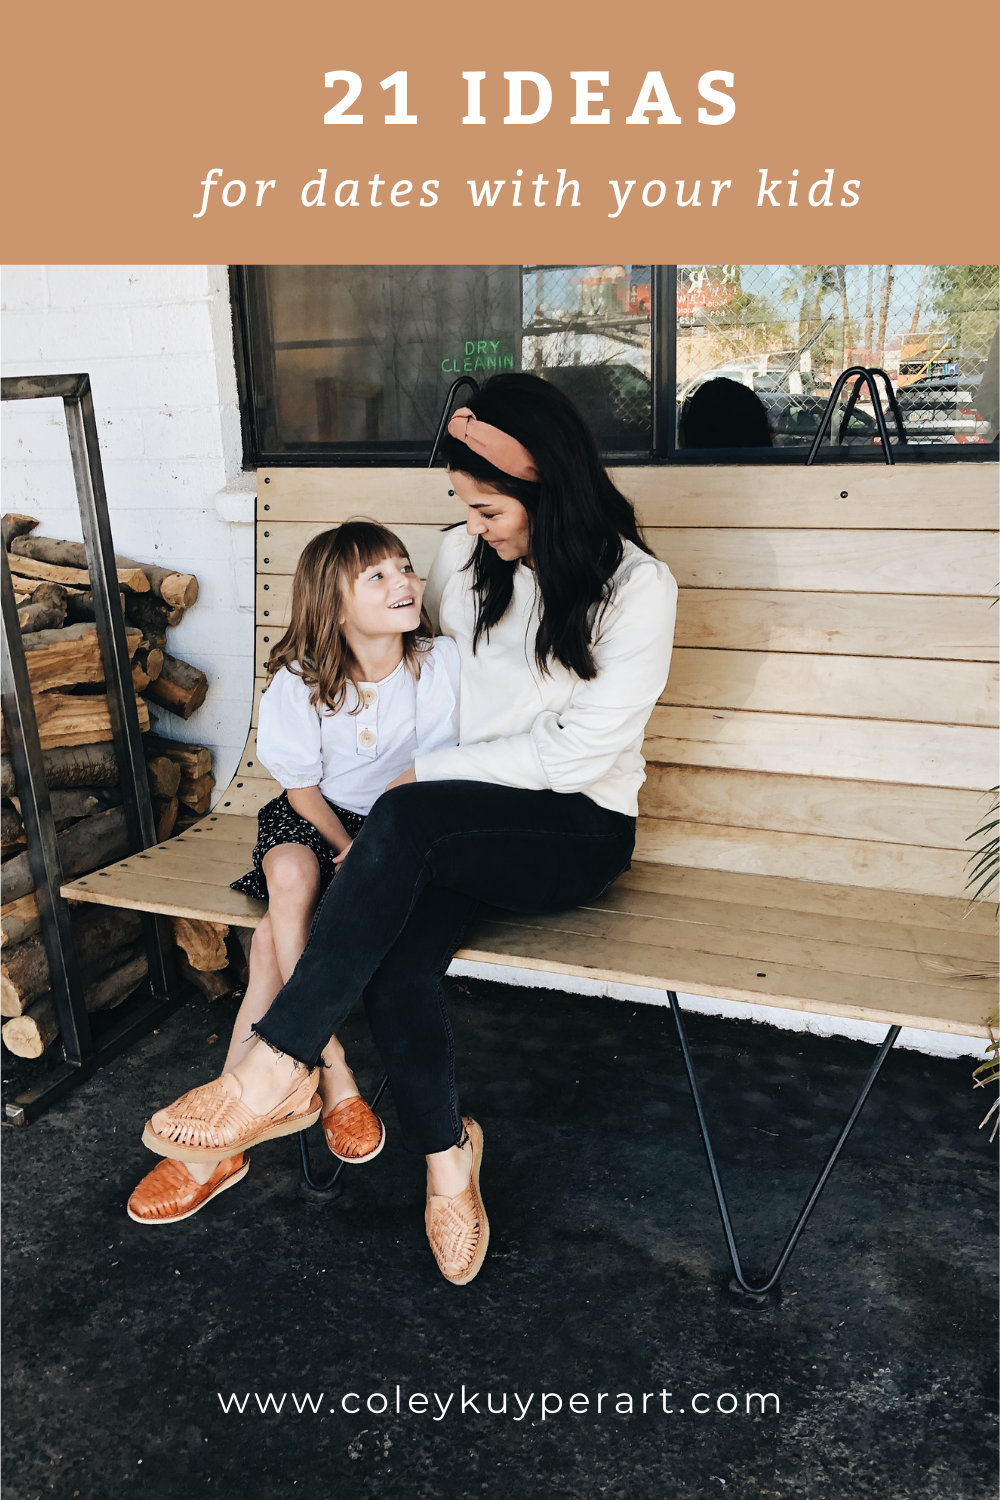 mom and daughter on a bench with words ideas for dates with kids above it